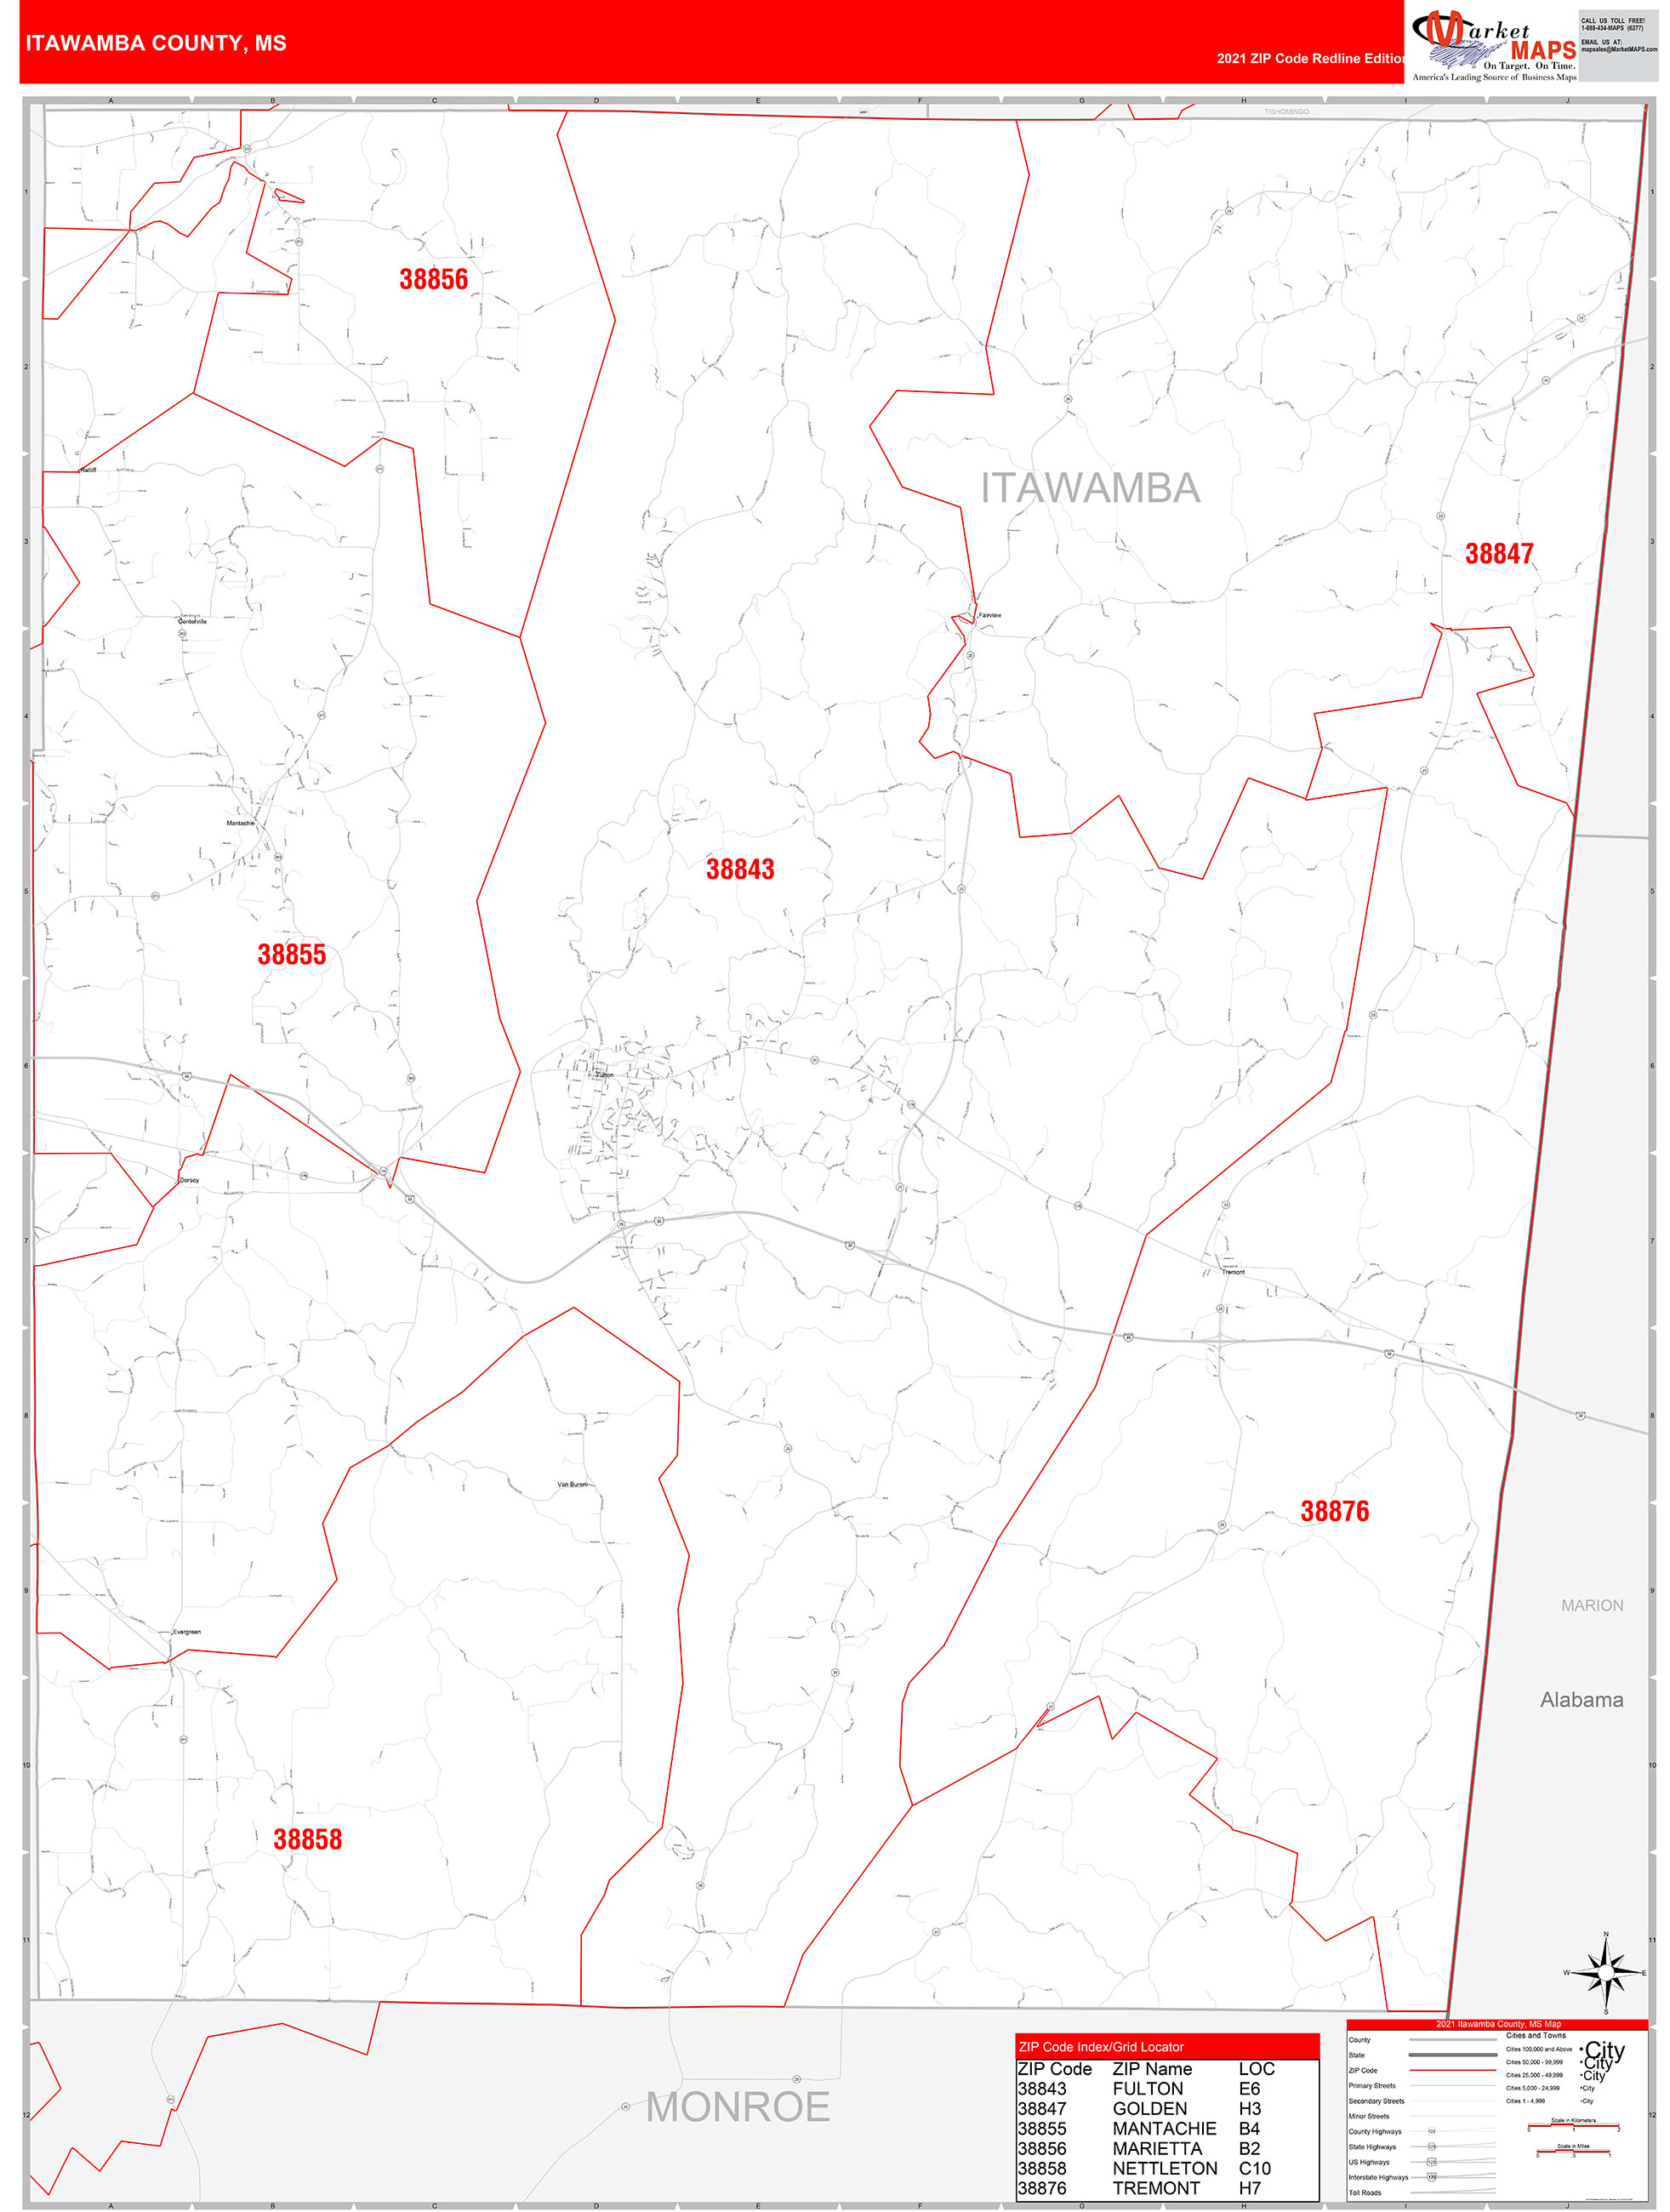 Itawamba County Ms Zip Code Wall Map Red Line Style By Marketmaps 2116